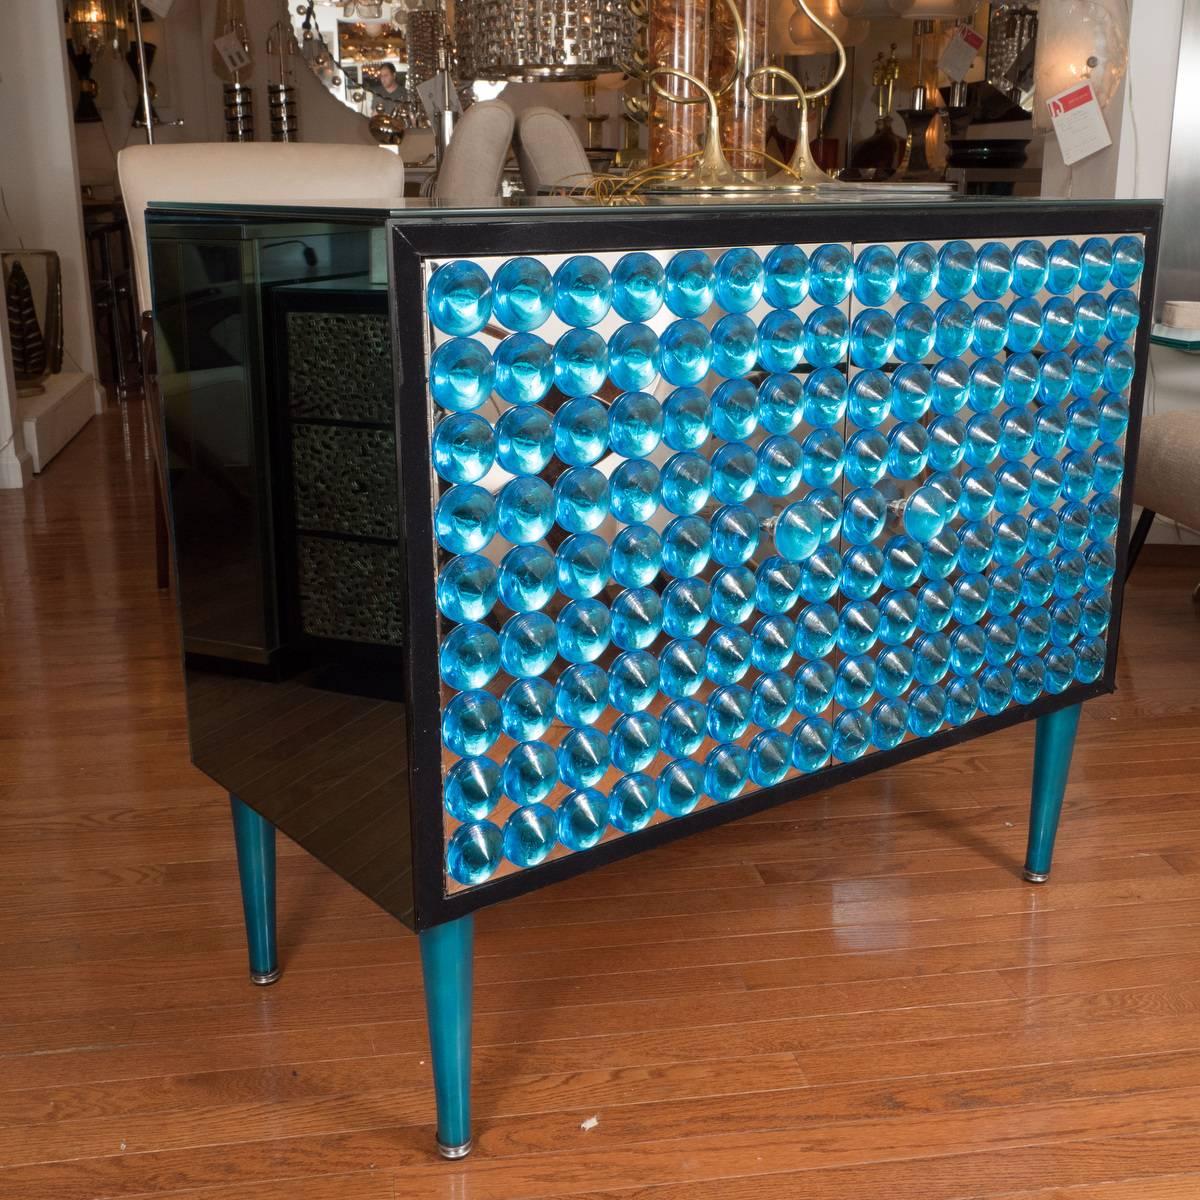 Lacquered wood and blue mirrored cabinet with applied glass element design on doors.